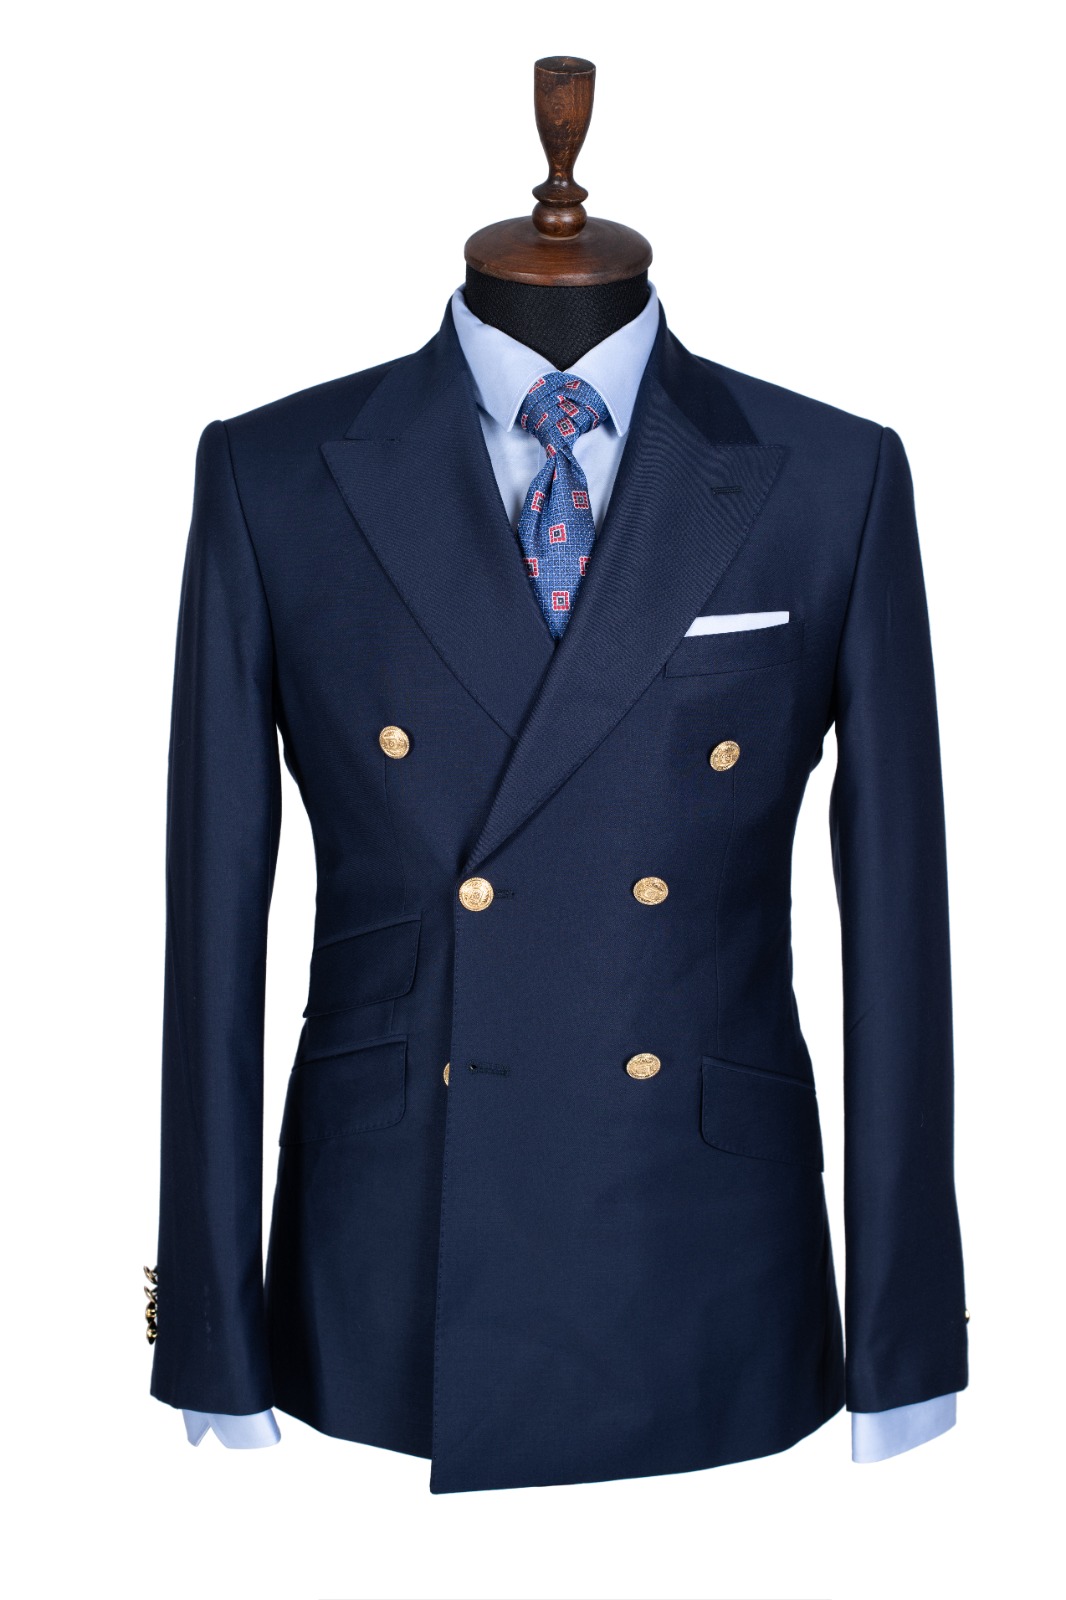 NAVY BLUE DOUBLE BREASTED SUIT - Stanlion Best Business Suits